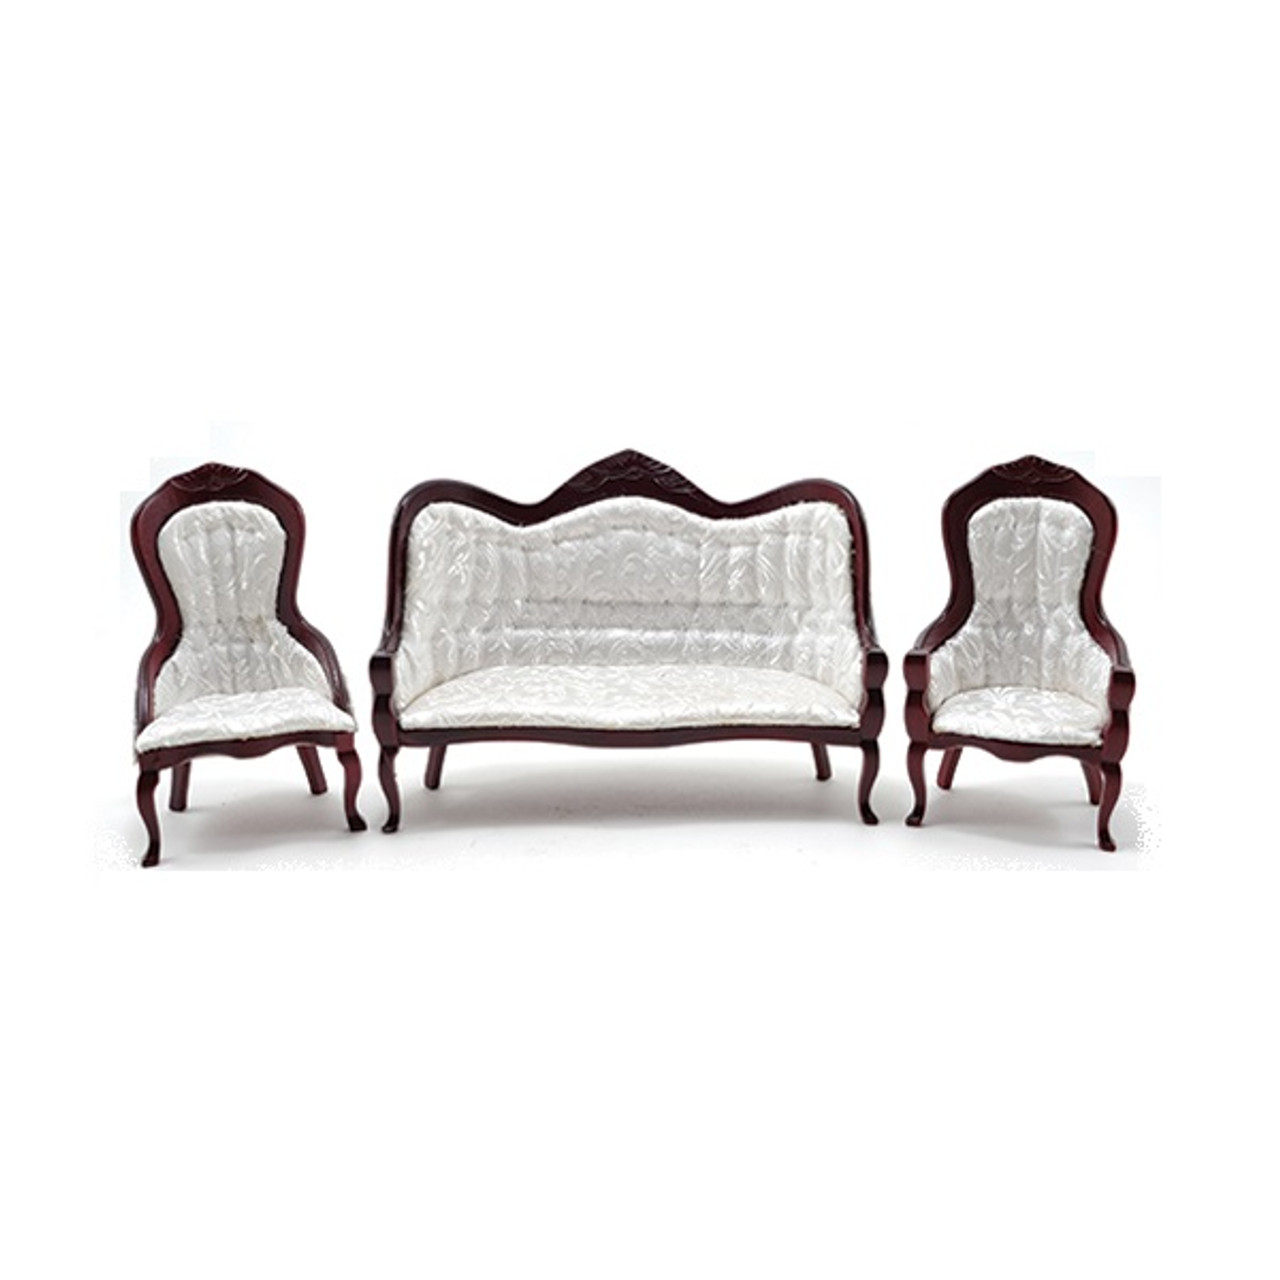 CLA91714 - One-inch (1:12) Scale Dollhouse Miniature Victorian Seating Set (3 pieces)